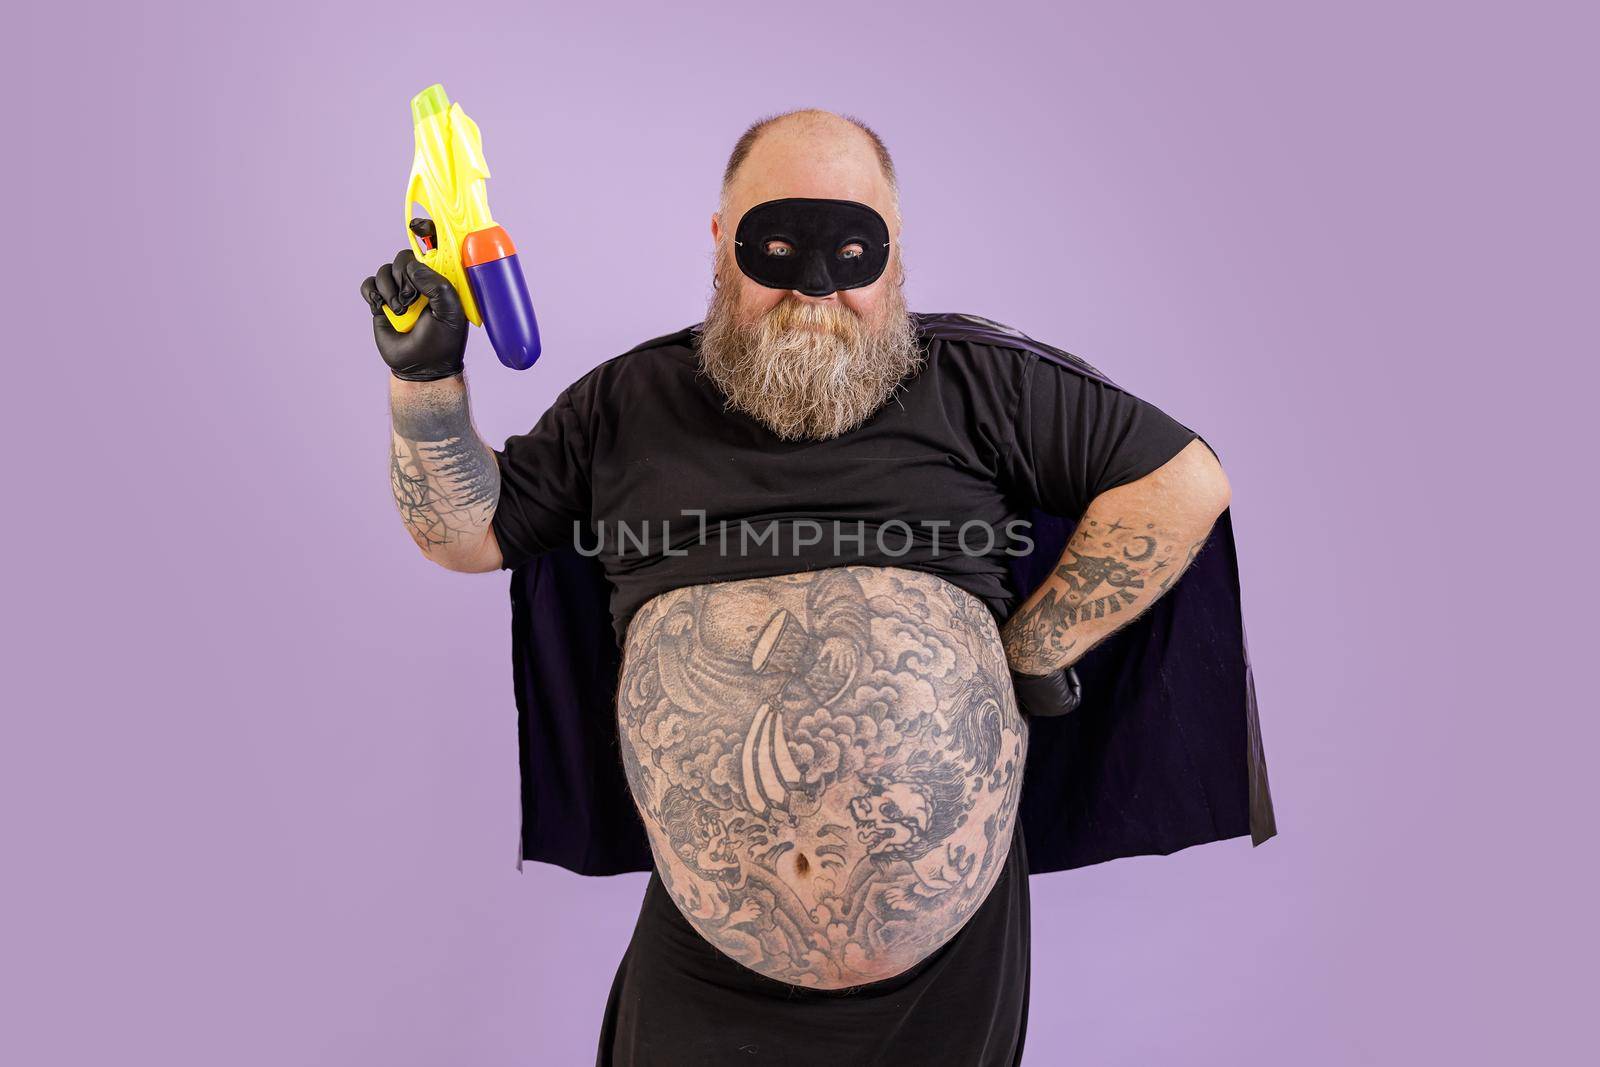 Mature bearded man with large tattooed abdomen wearing carnival costume with cape and mask holds toy blaster posing on purple background in studio